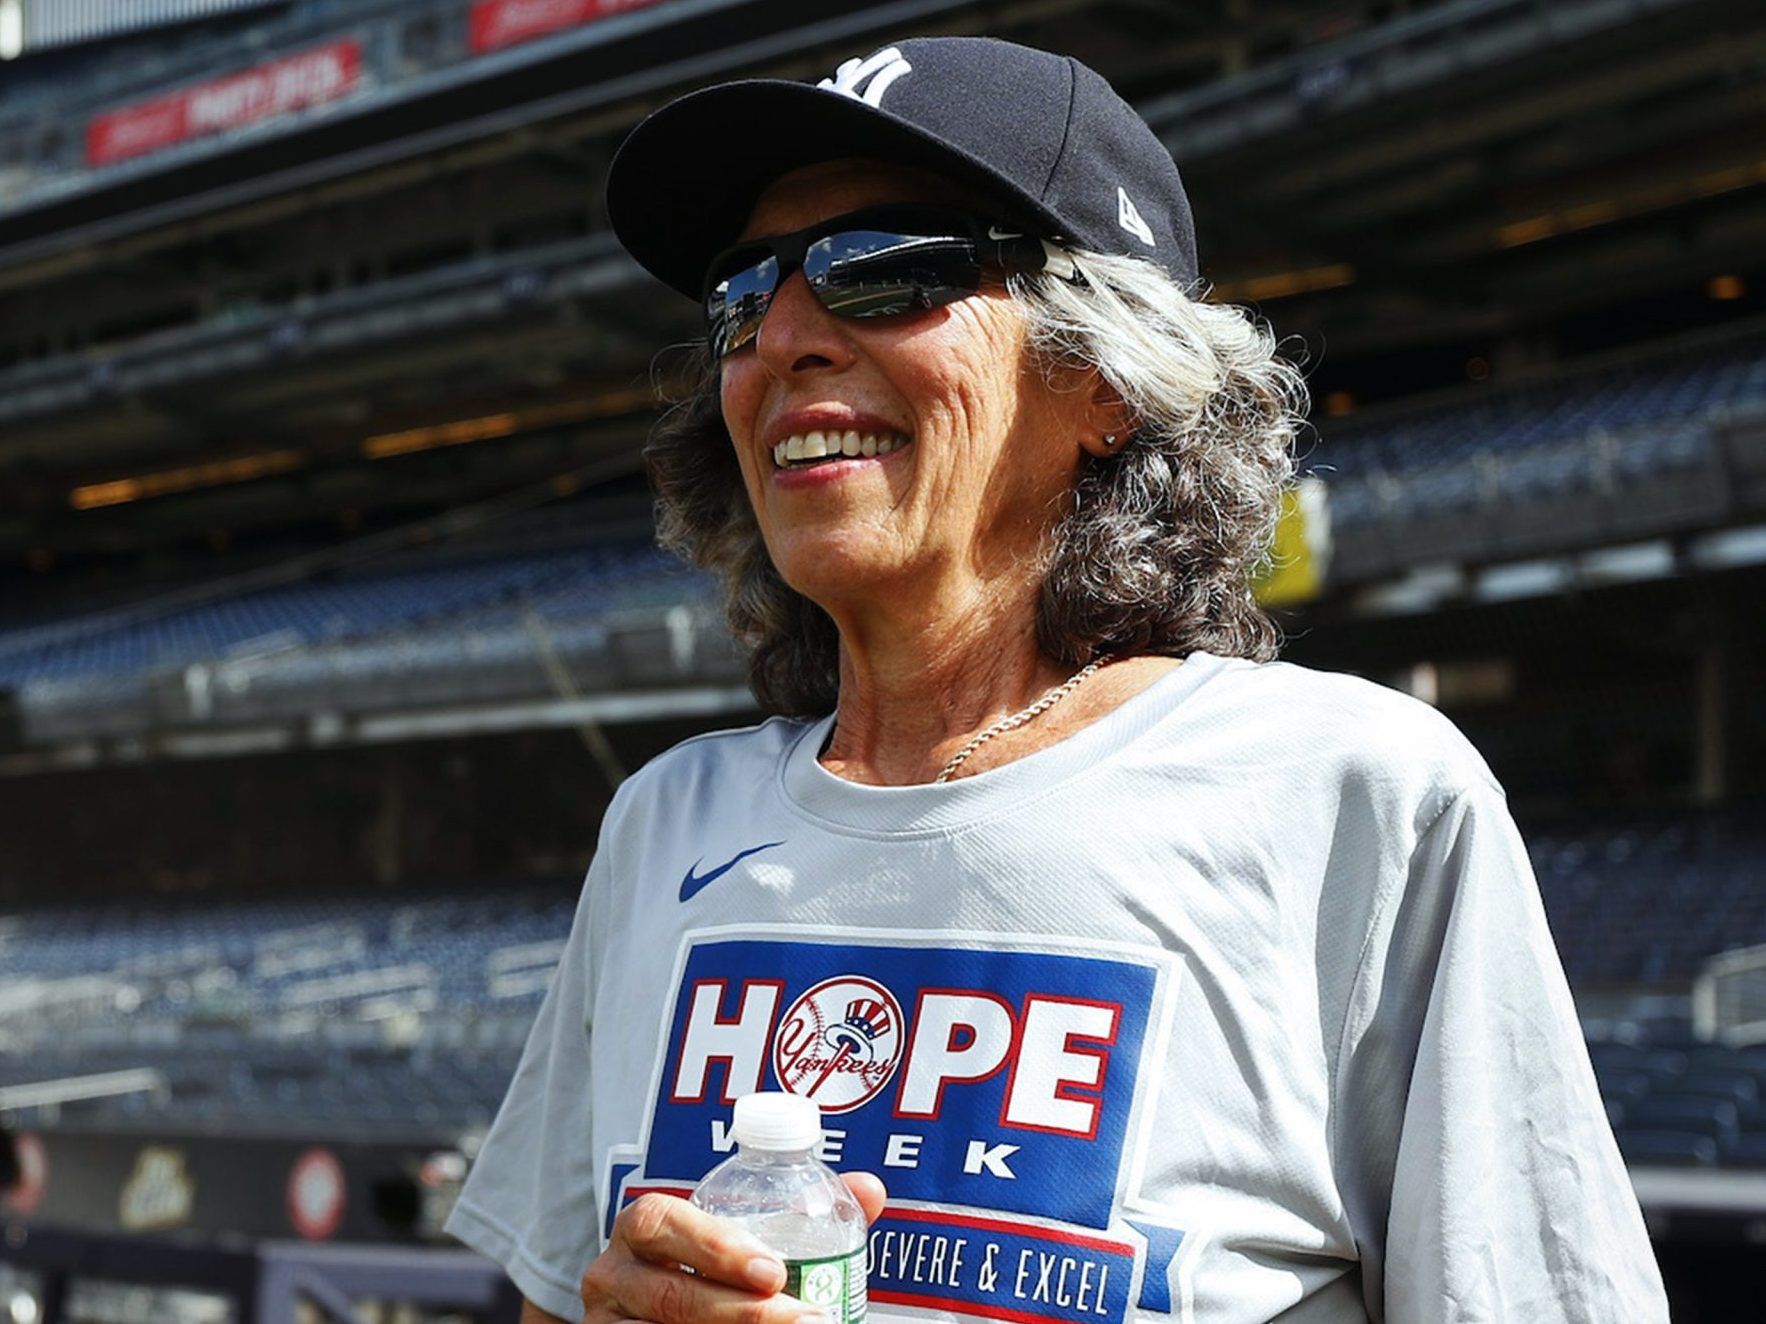 70-year-old woman gets to be NY Yankees' bat girl, throw out first pitch 